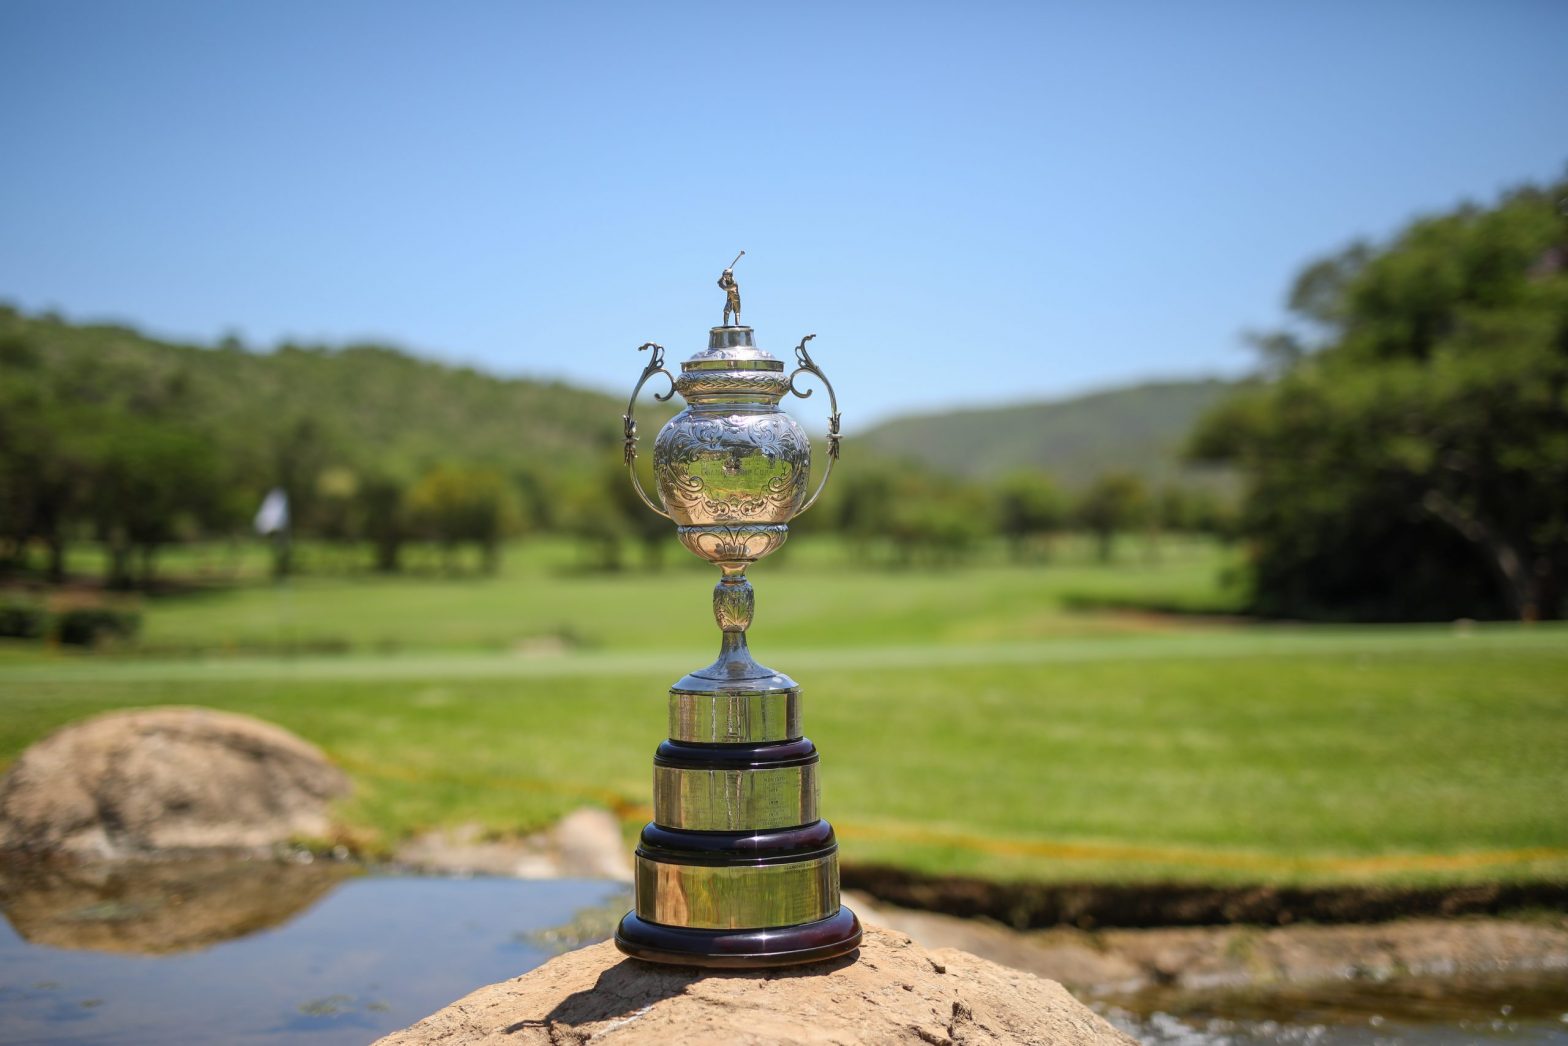 SA Open back at Sun City and as part of new Sunshine Tour and European Tour partnership